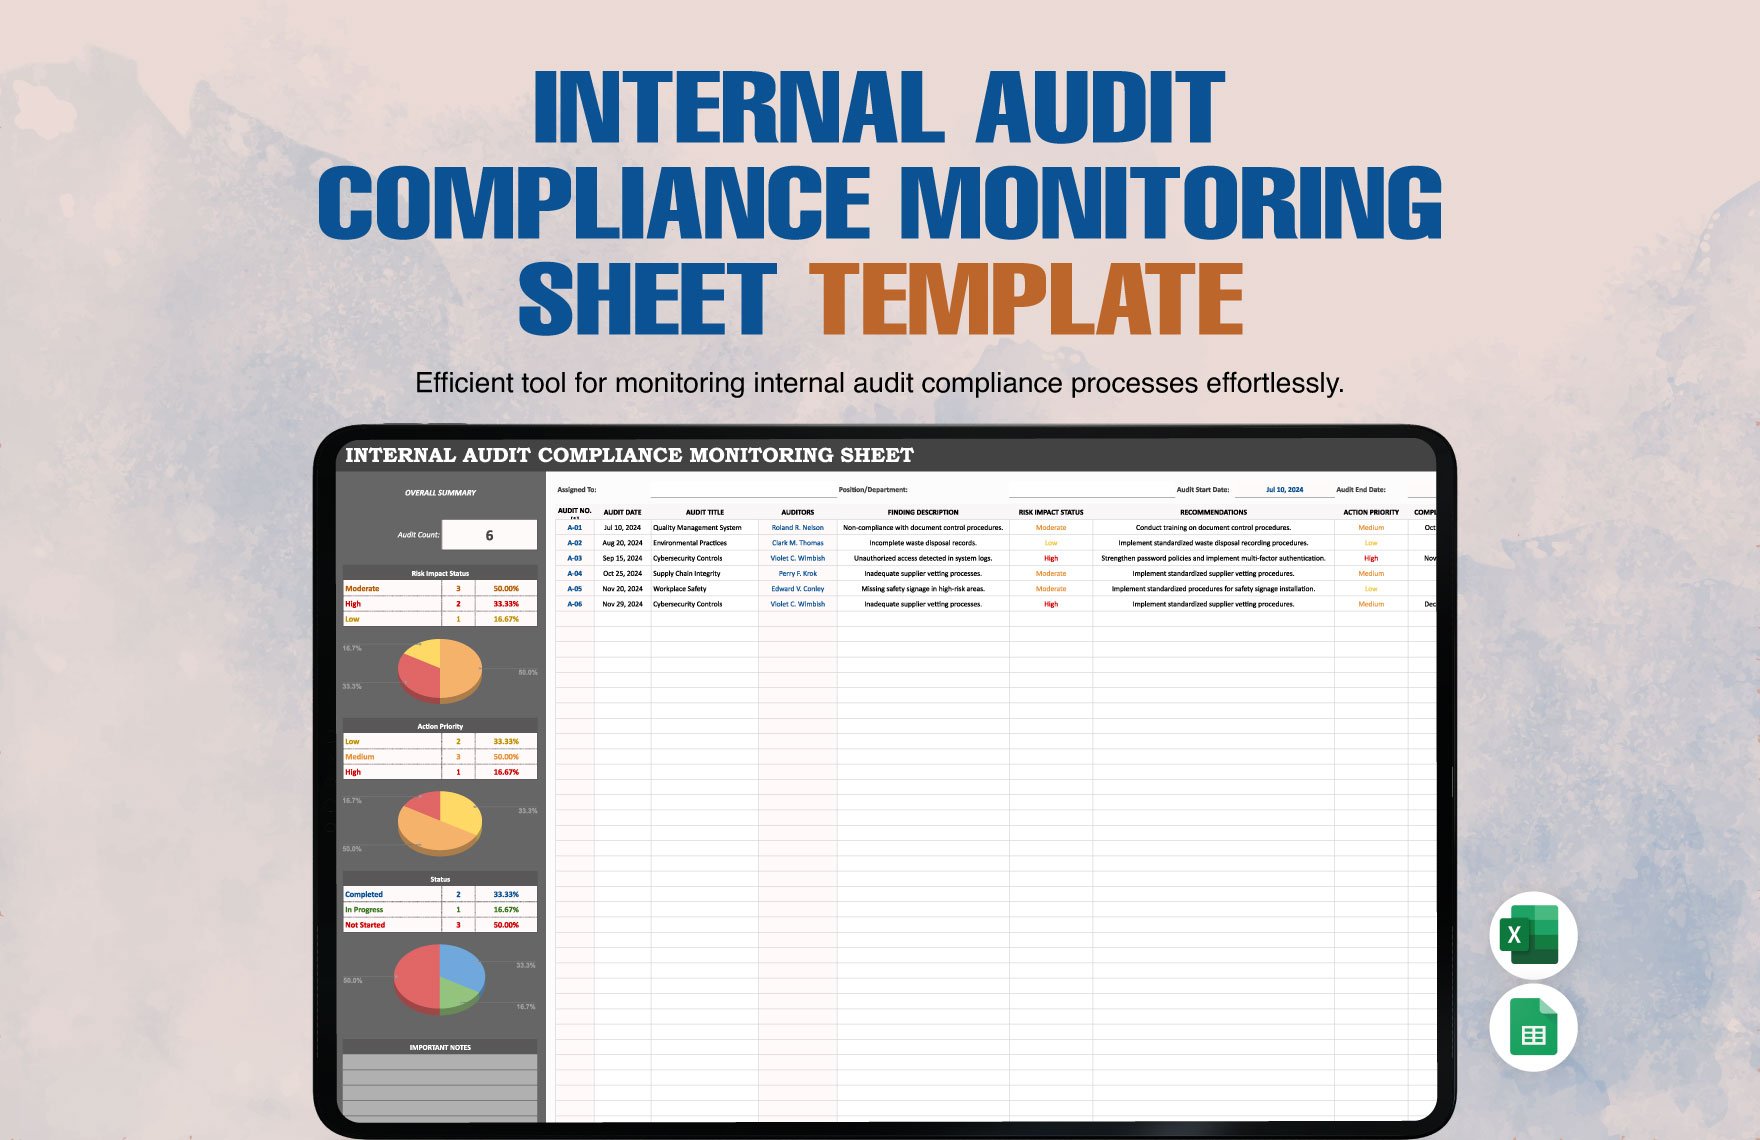 Internal Audit Compliance Monitoring Sheet Template in Excel, Google Sheets